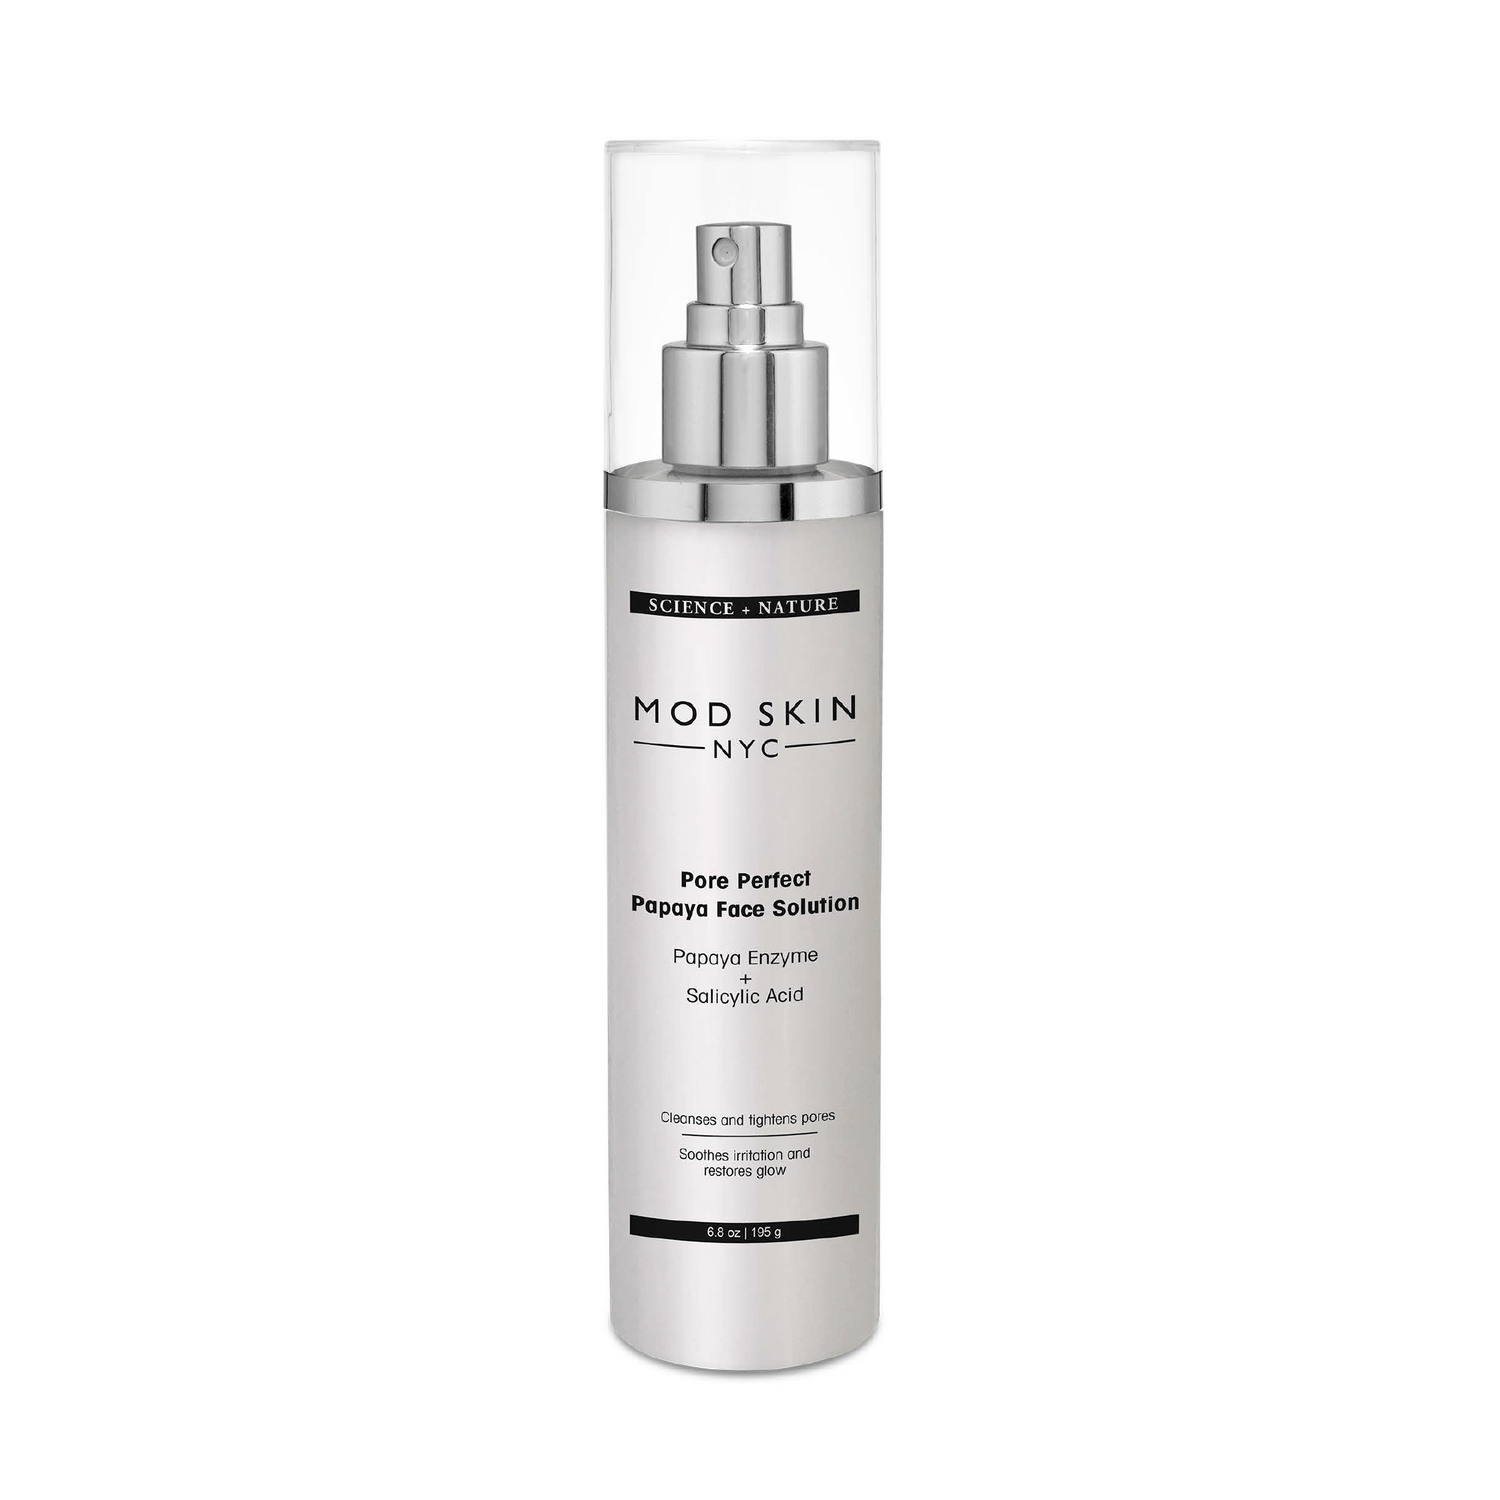 MOD SKIN NYC Pore Perfect Papaya Face Solution (177 ml / 6.0 oz) - The DLG Store